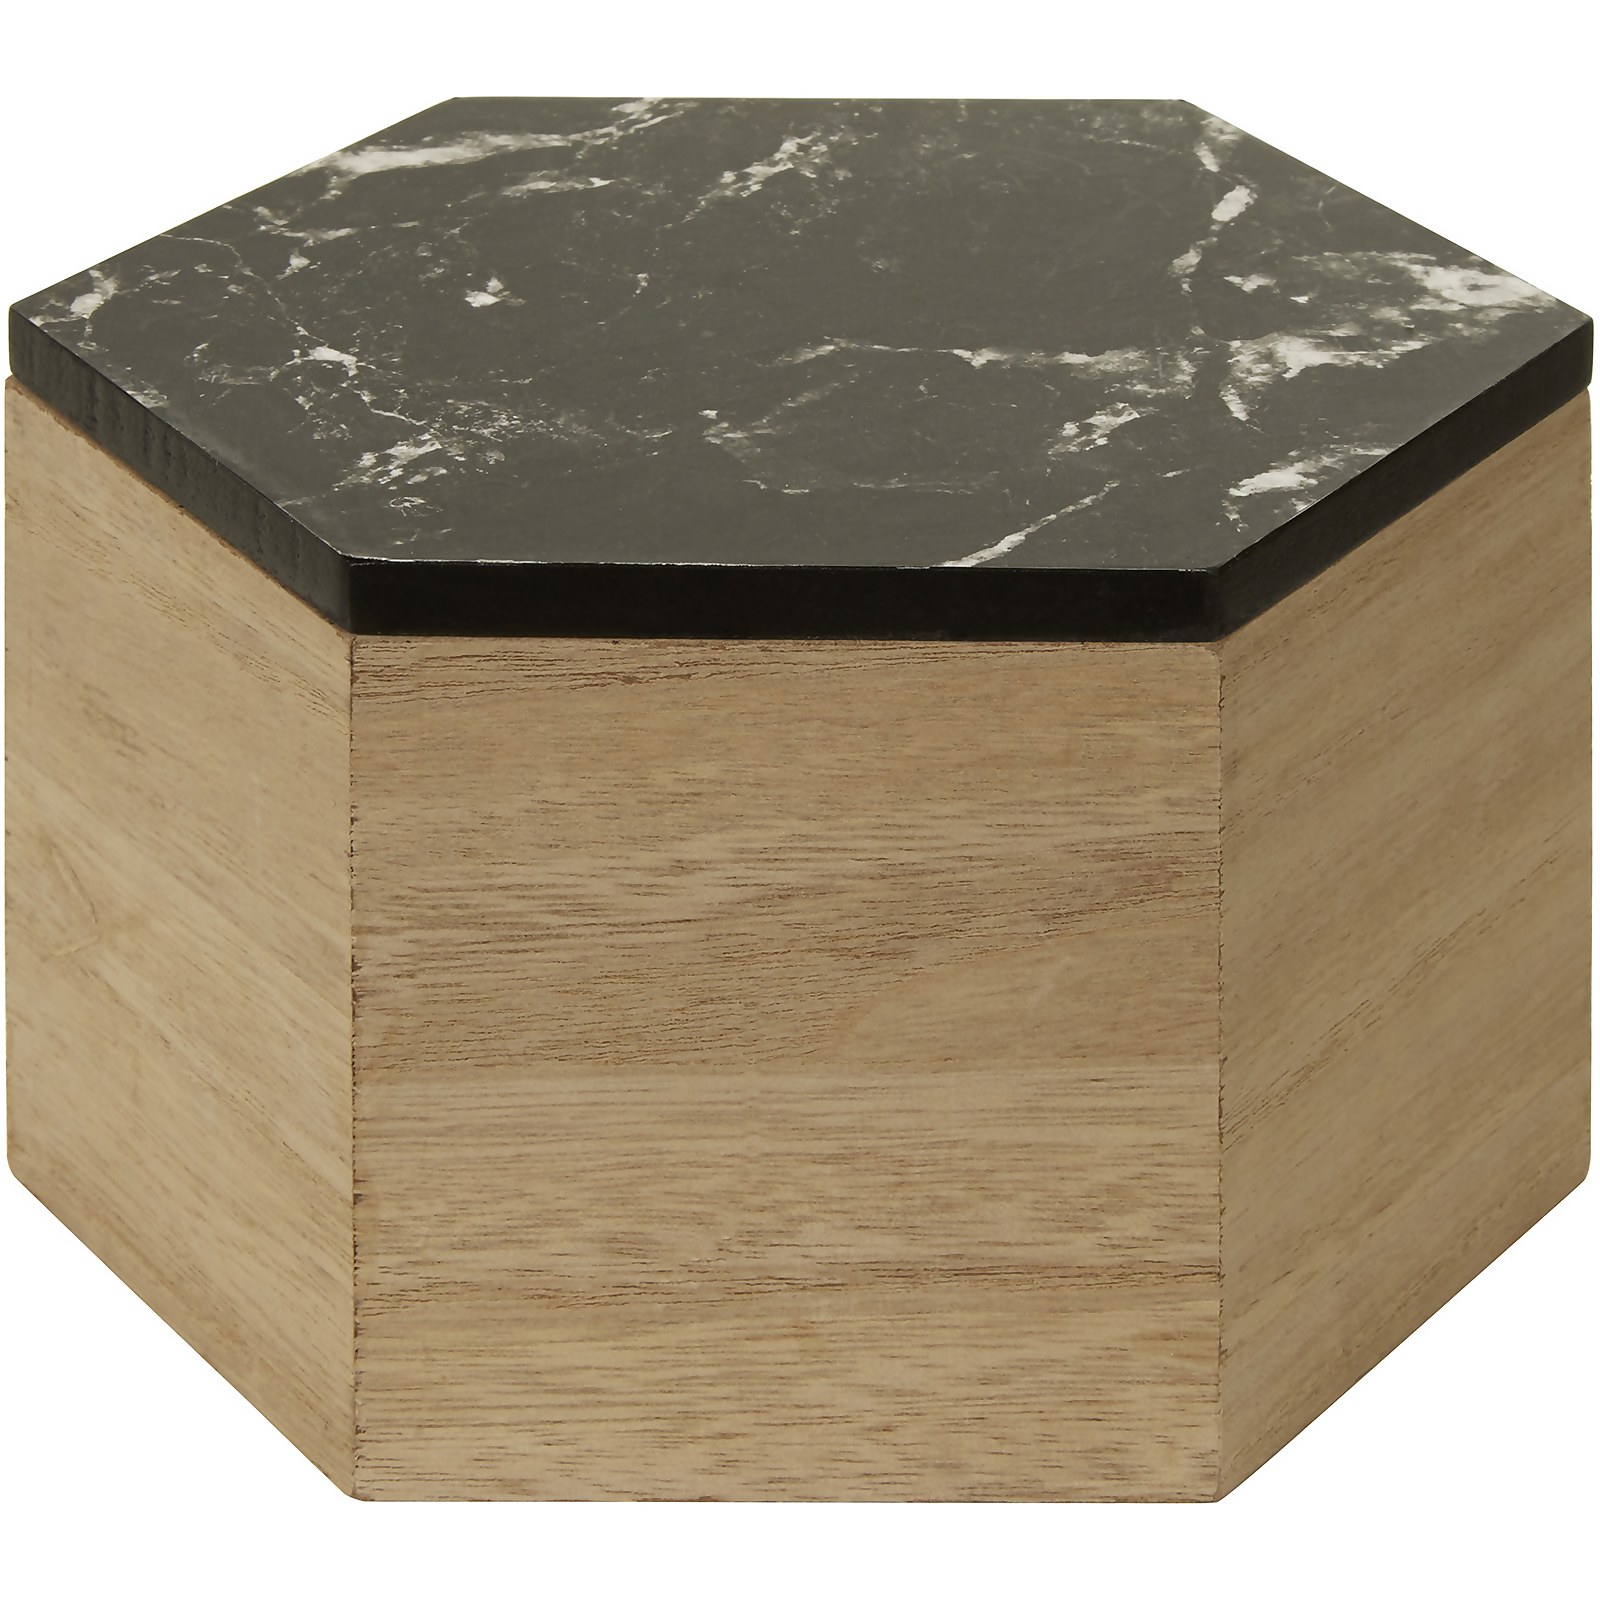 Image of Mimo Hexagon Trinket Box - Black Faux Marble